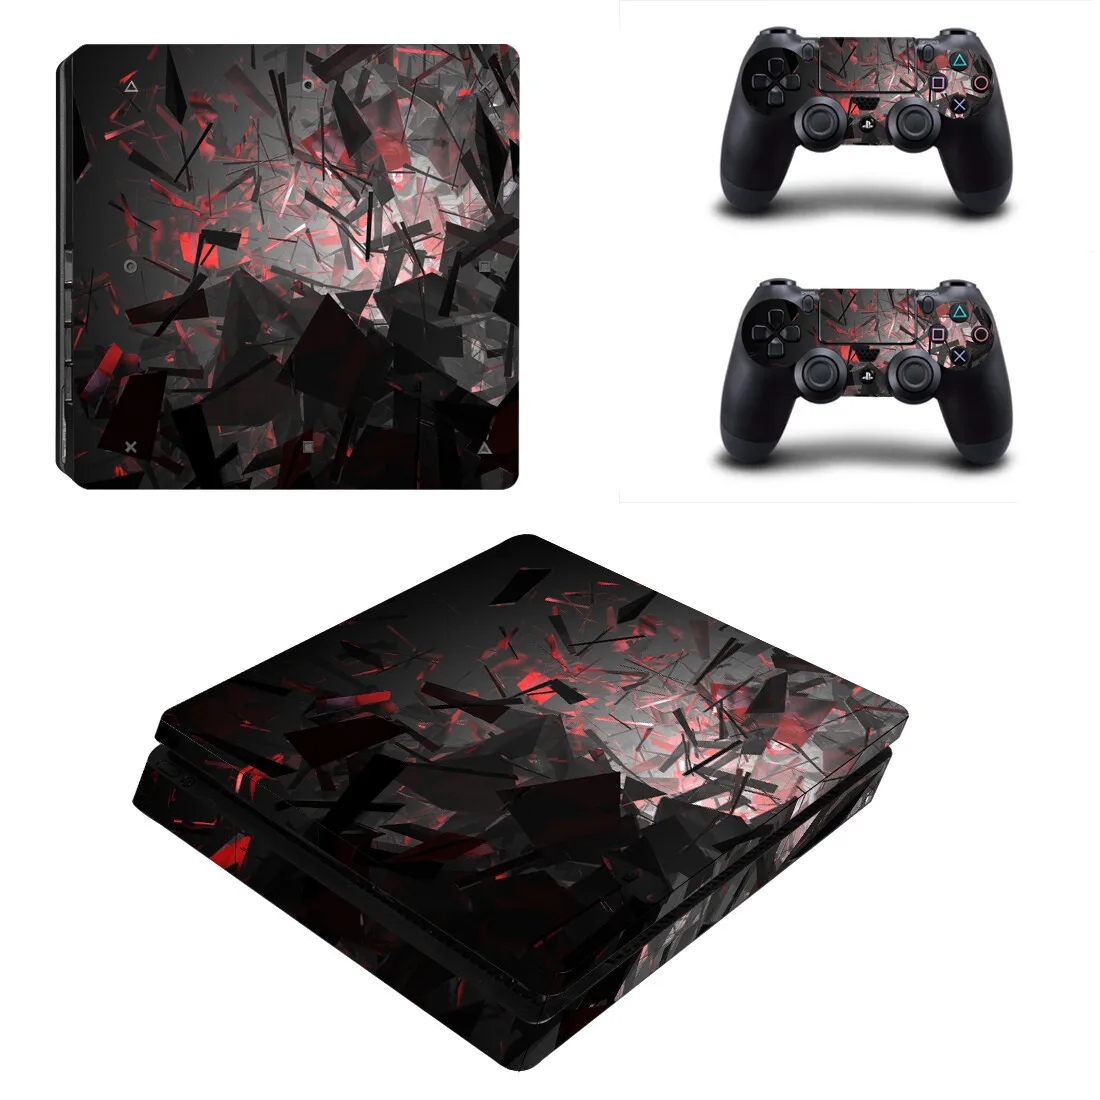 

Custom Design PS4 Slim Skin Sticker For Sony PlayStation 4 Console and Controllers PS4 Slim Skins Sticker Decal Vinyl